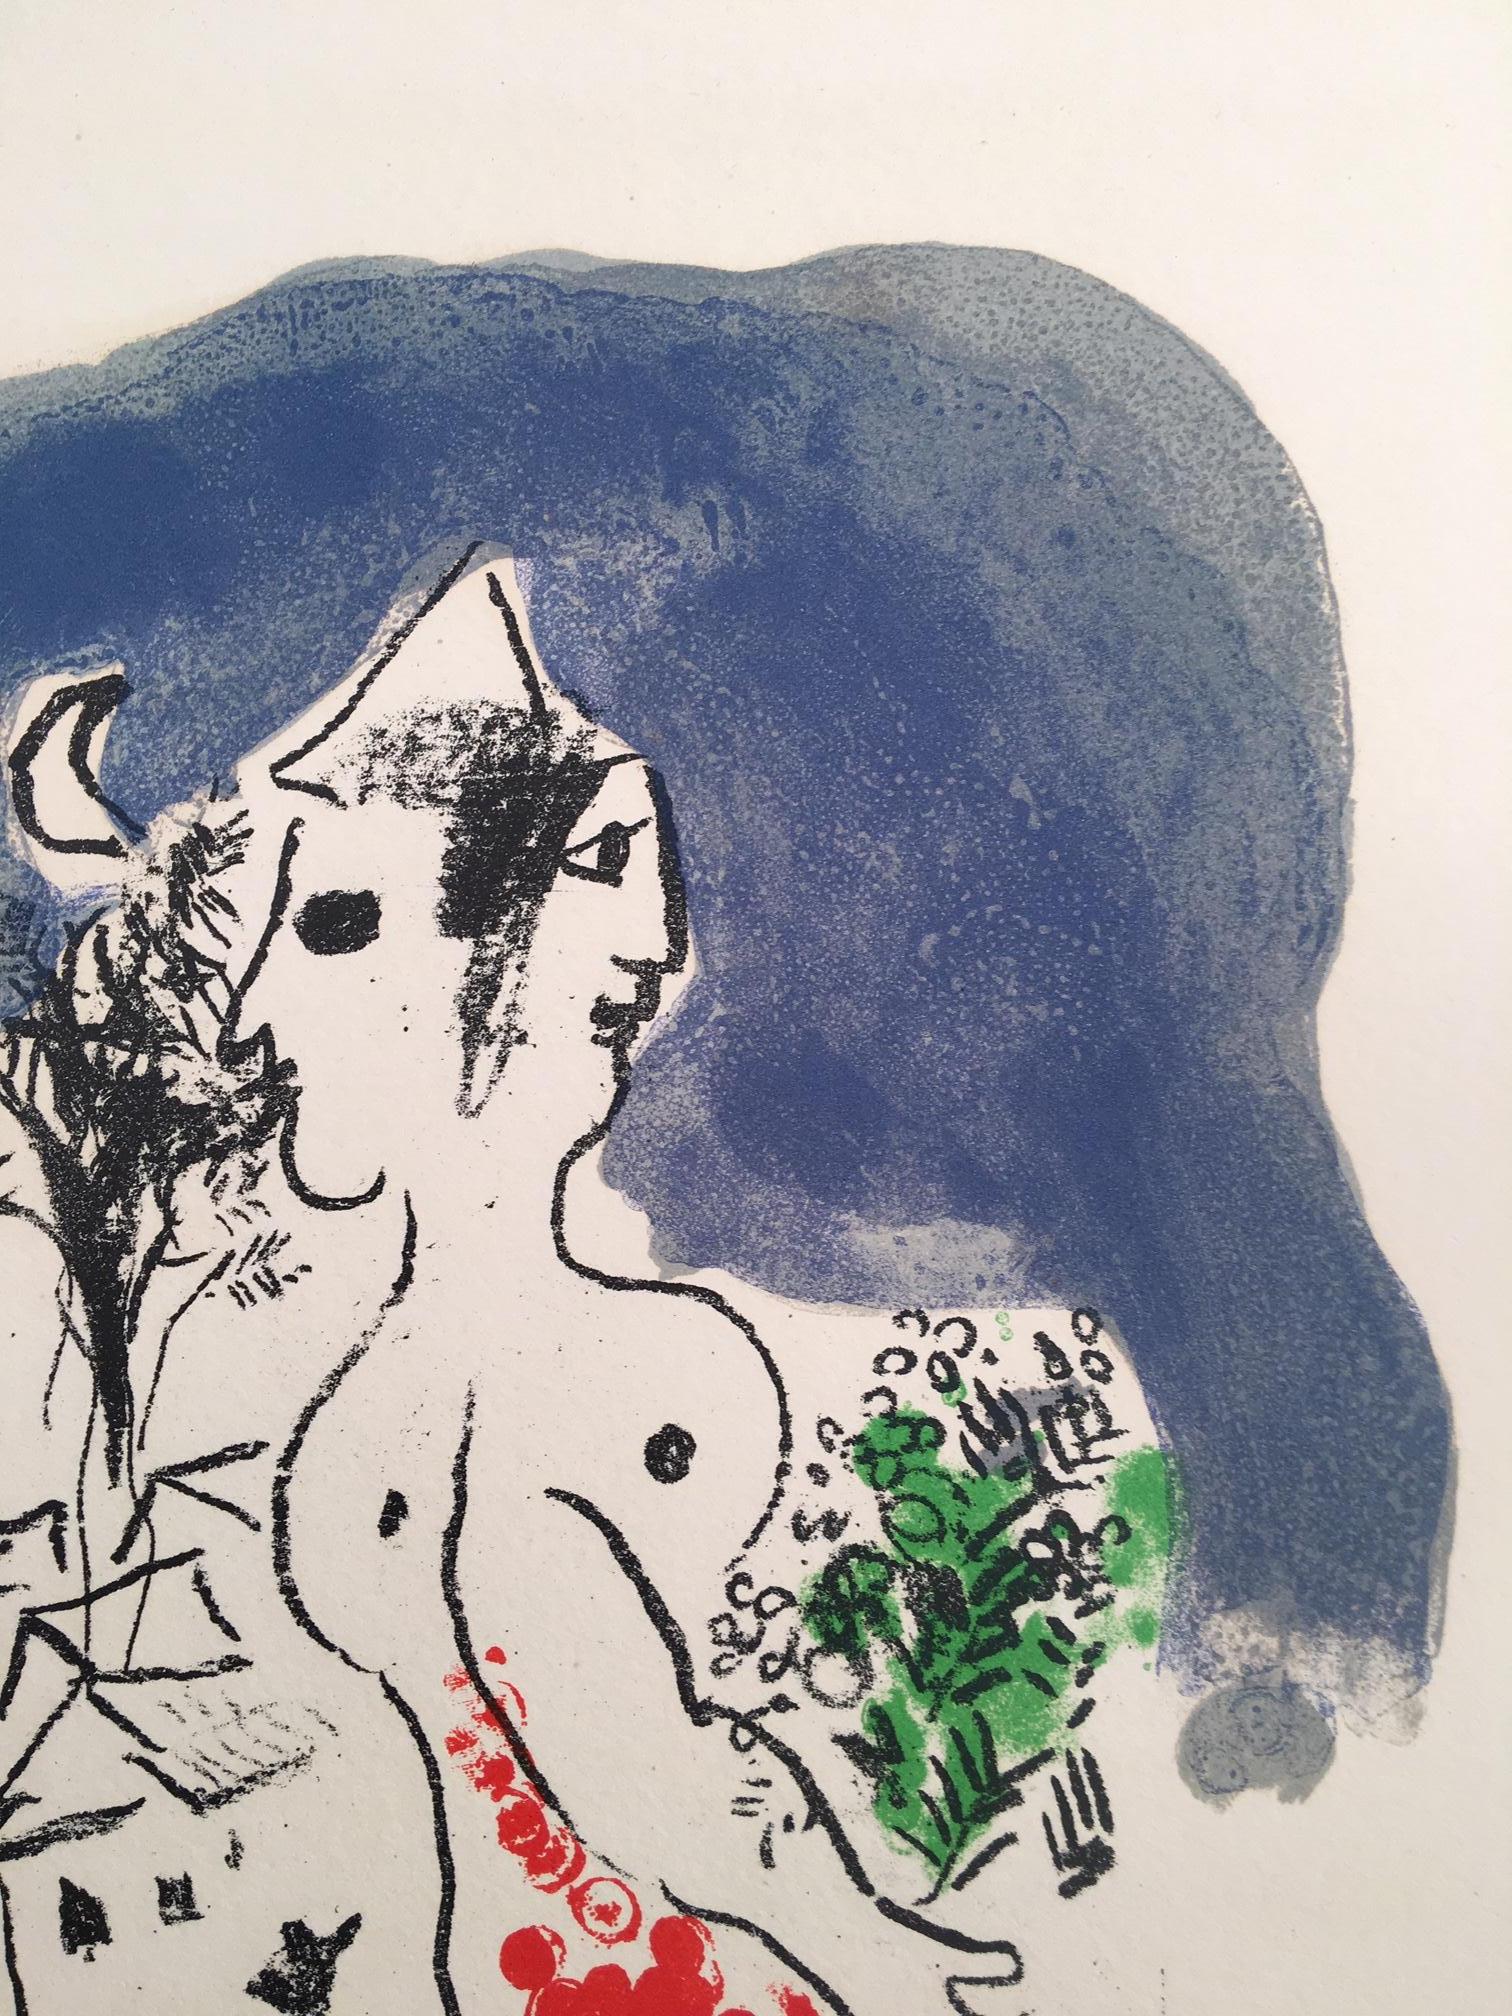 Chagall's Lithograph from the Flight Deluxe Portfolio - Print by Marc Chagall